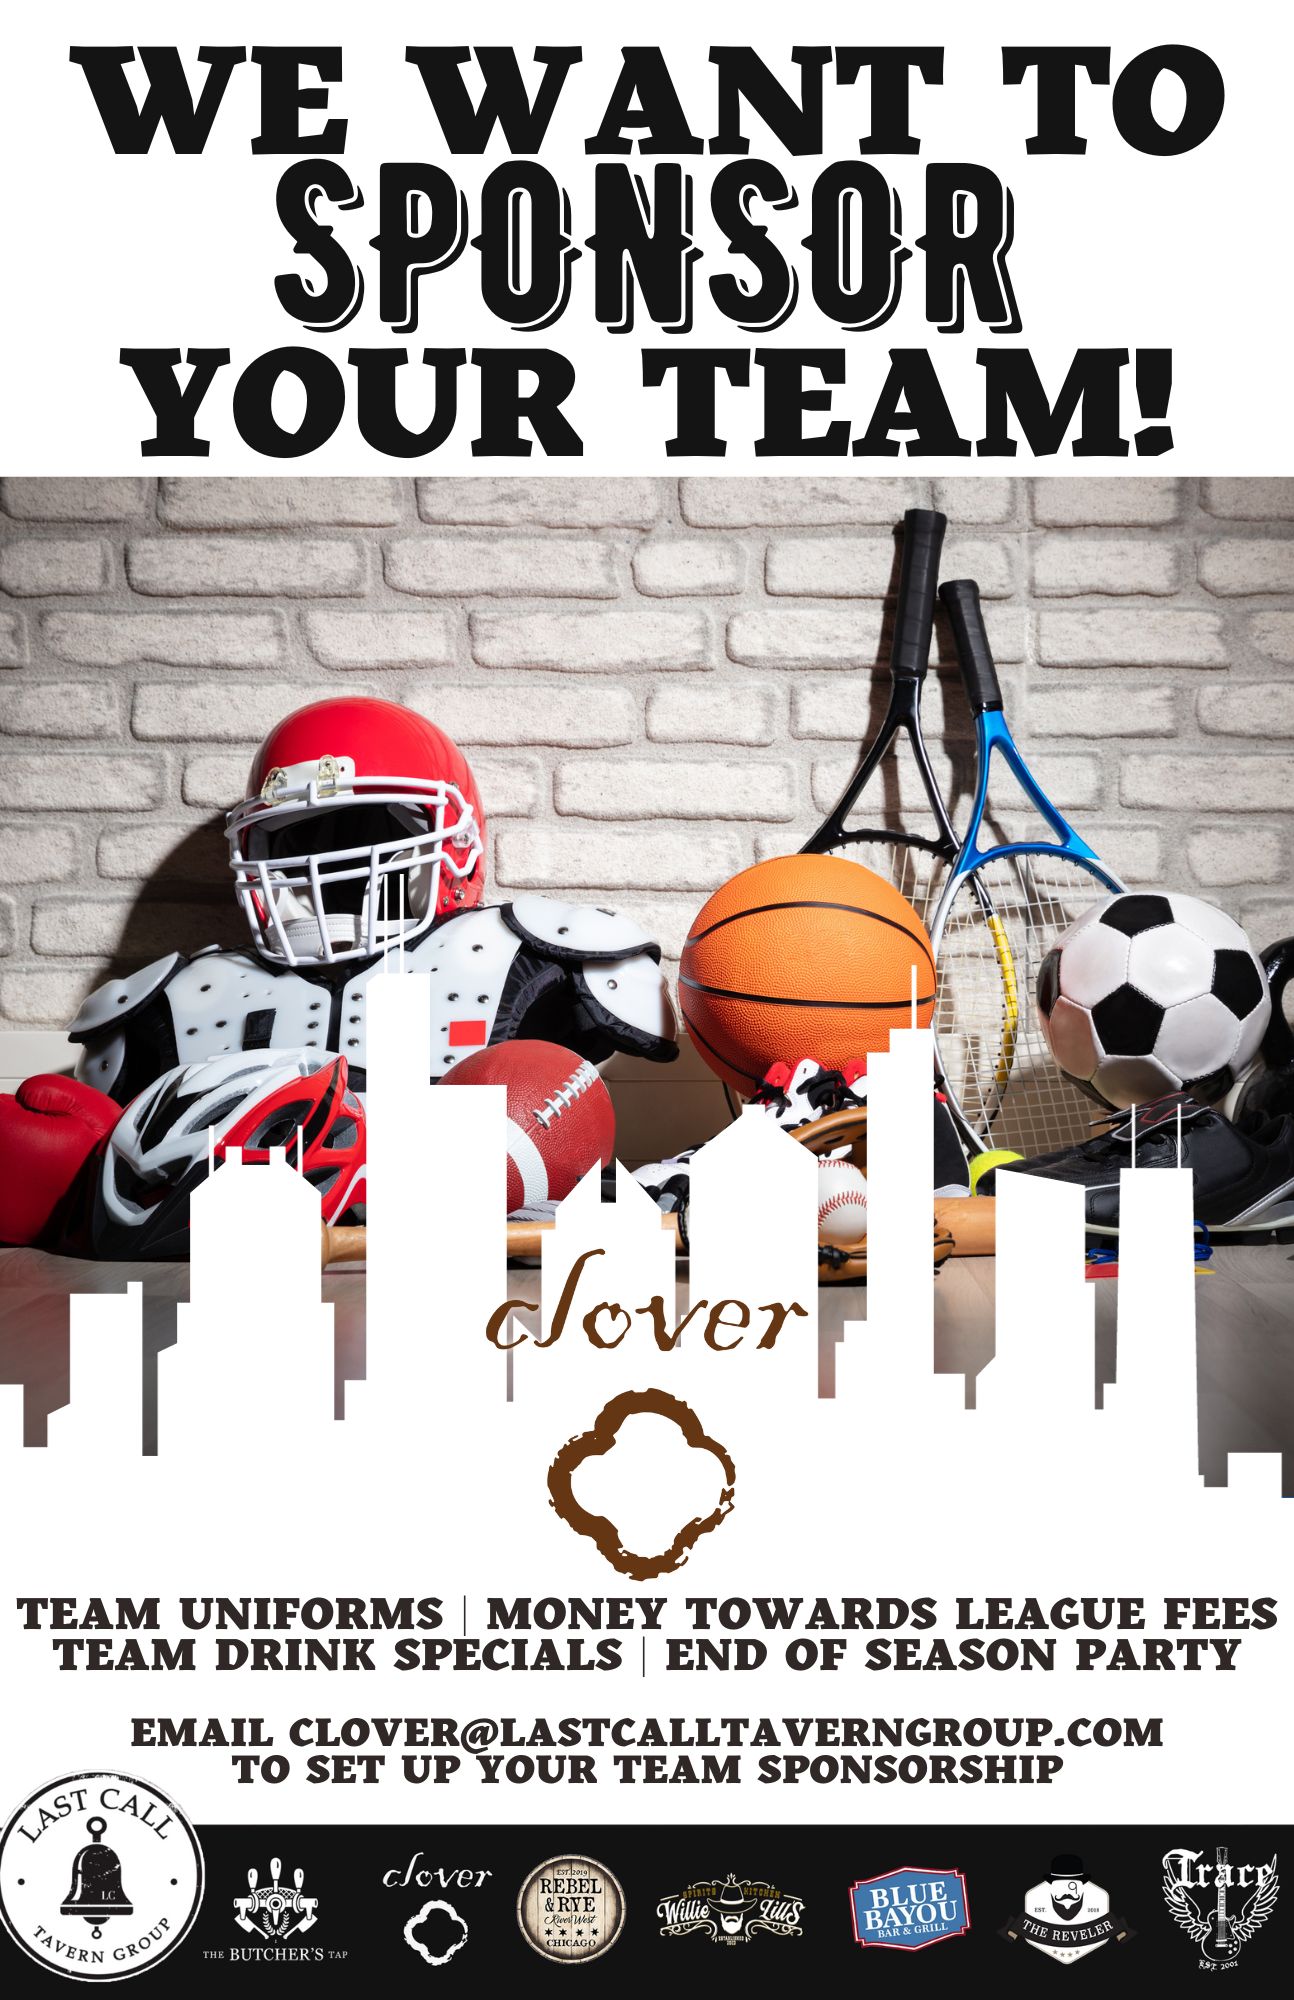 We want to sponsor your team! - Clover